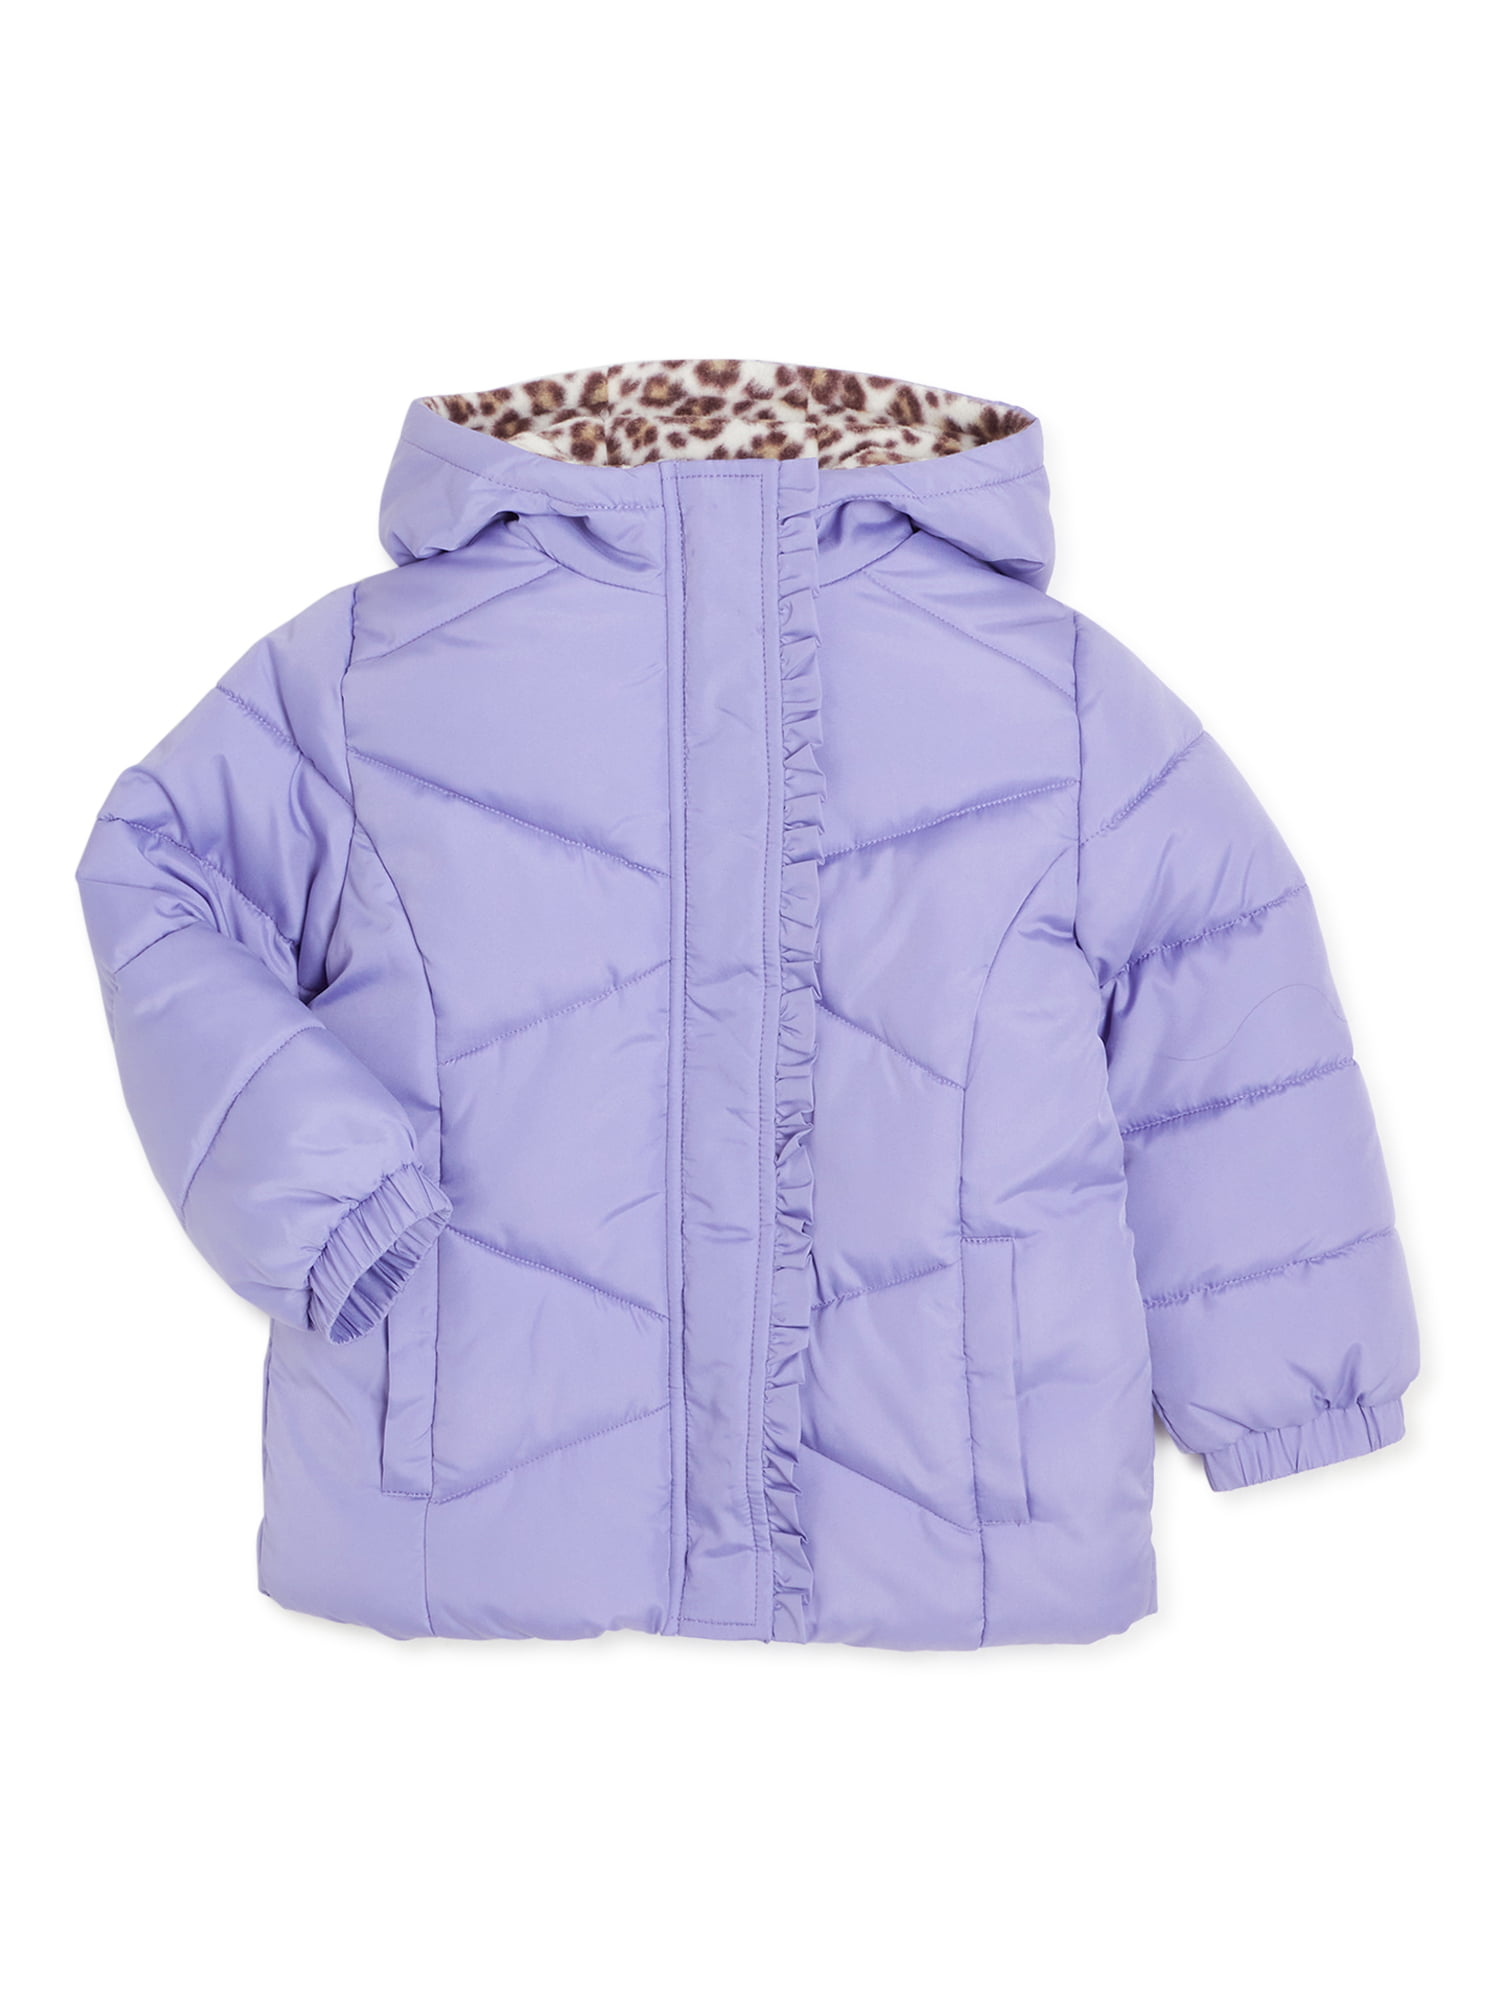 baby Gap Toddler Girls Navy Blue Hooded Puffer Coat with Ruffles